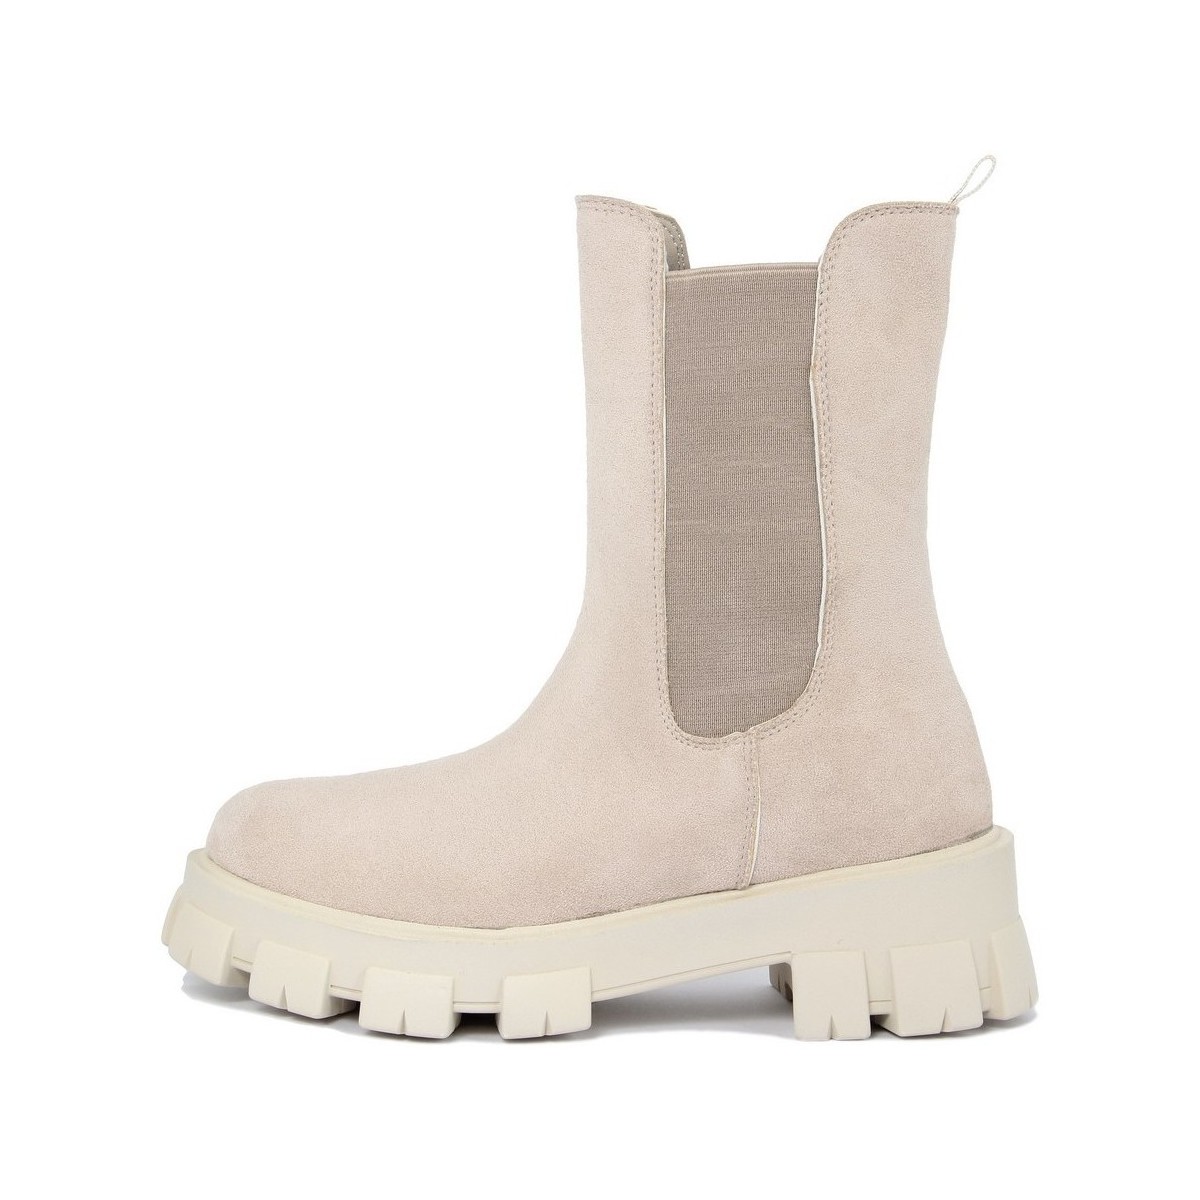 Chaussures Femme Nanette hiker boot with black shearling  Beige